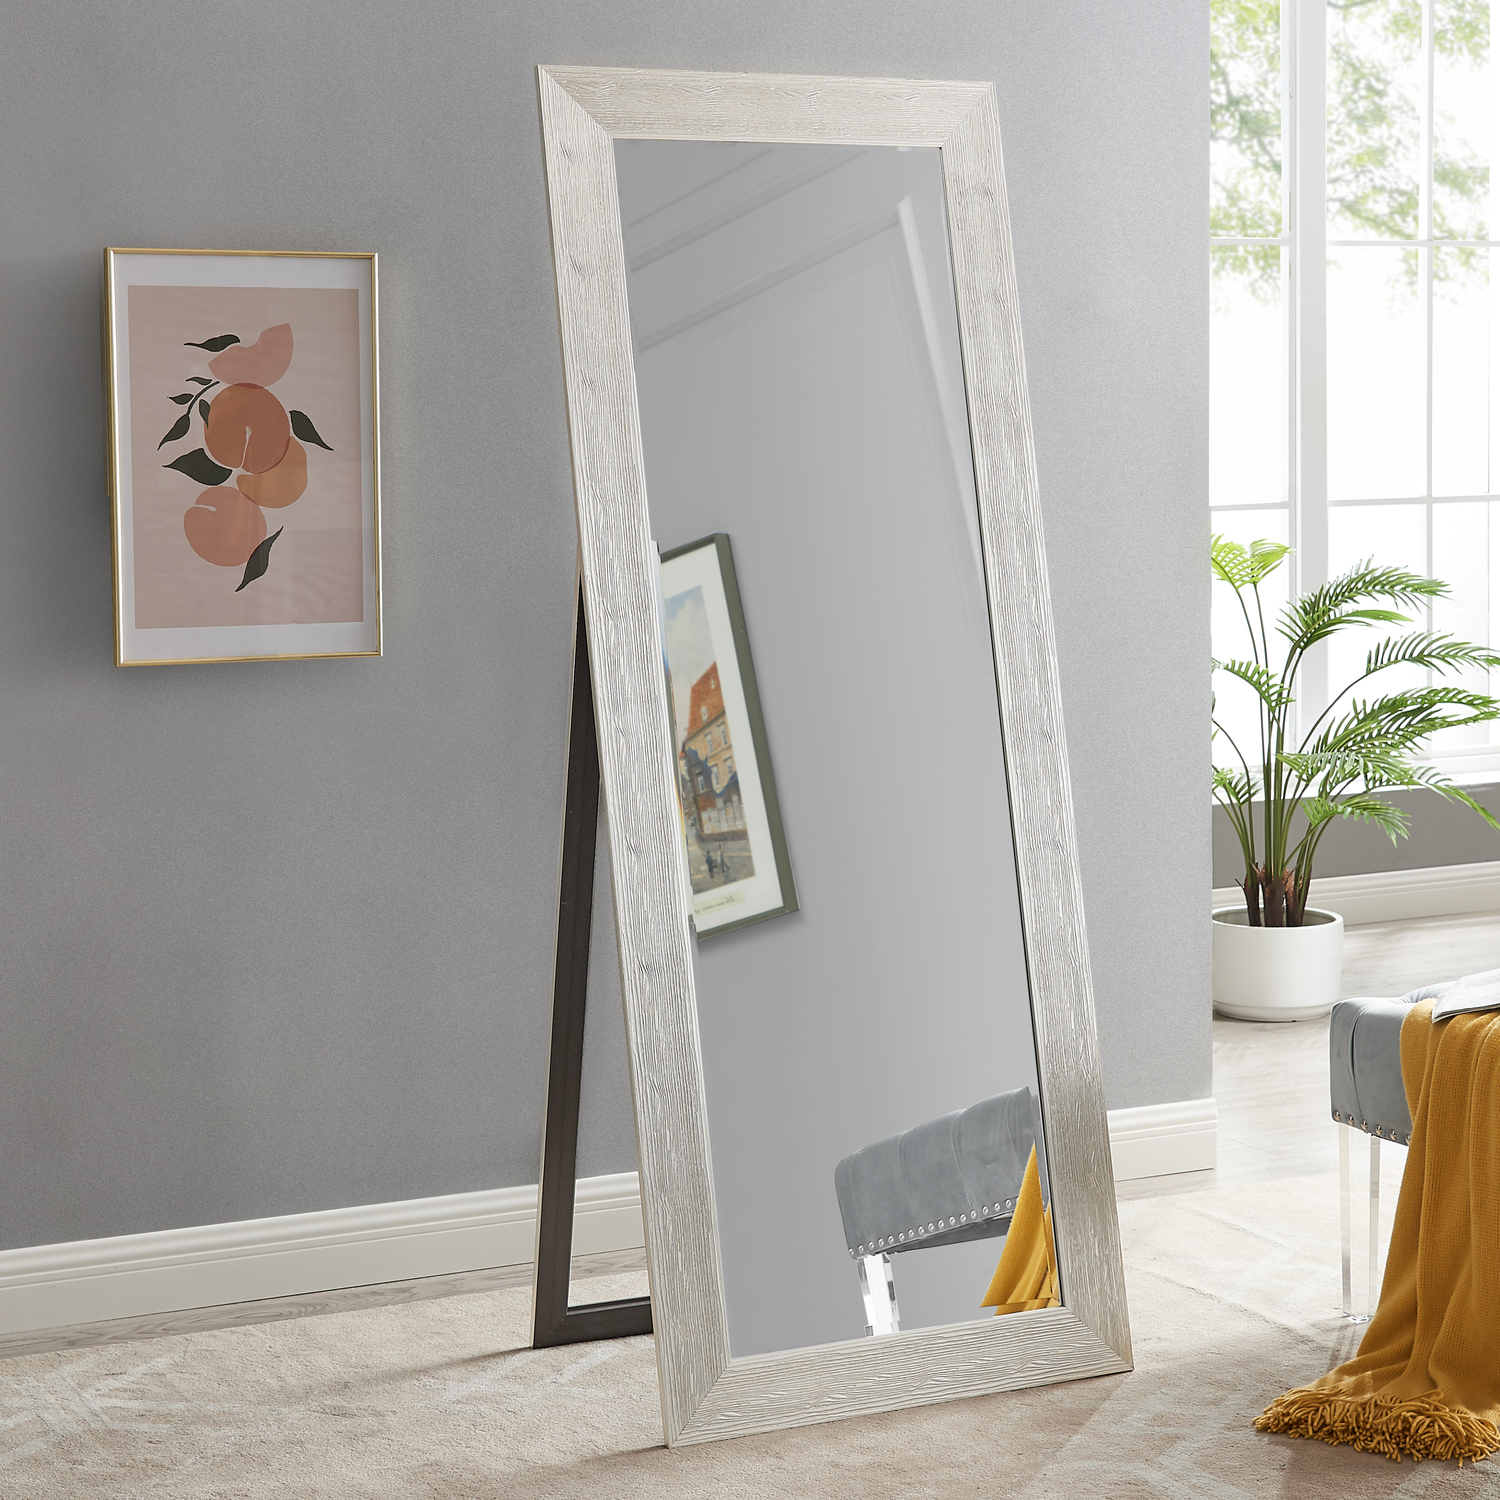 Full Body Mirror with Stand Wooden Framed Floor Length Mirror Stand Up Mirror  Full Length Mirror with Stand Mirror Full Length Large Freestanding Leaner  Mirror Faux Wood Mirror with Stand – Silver